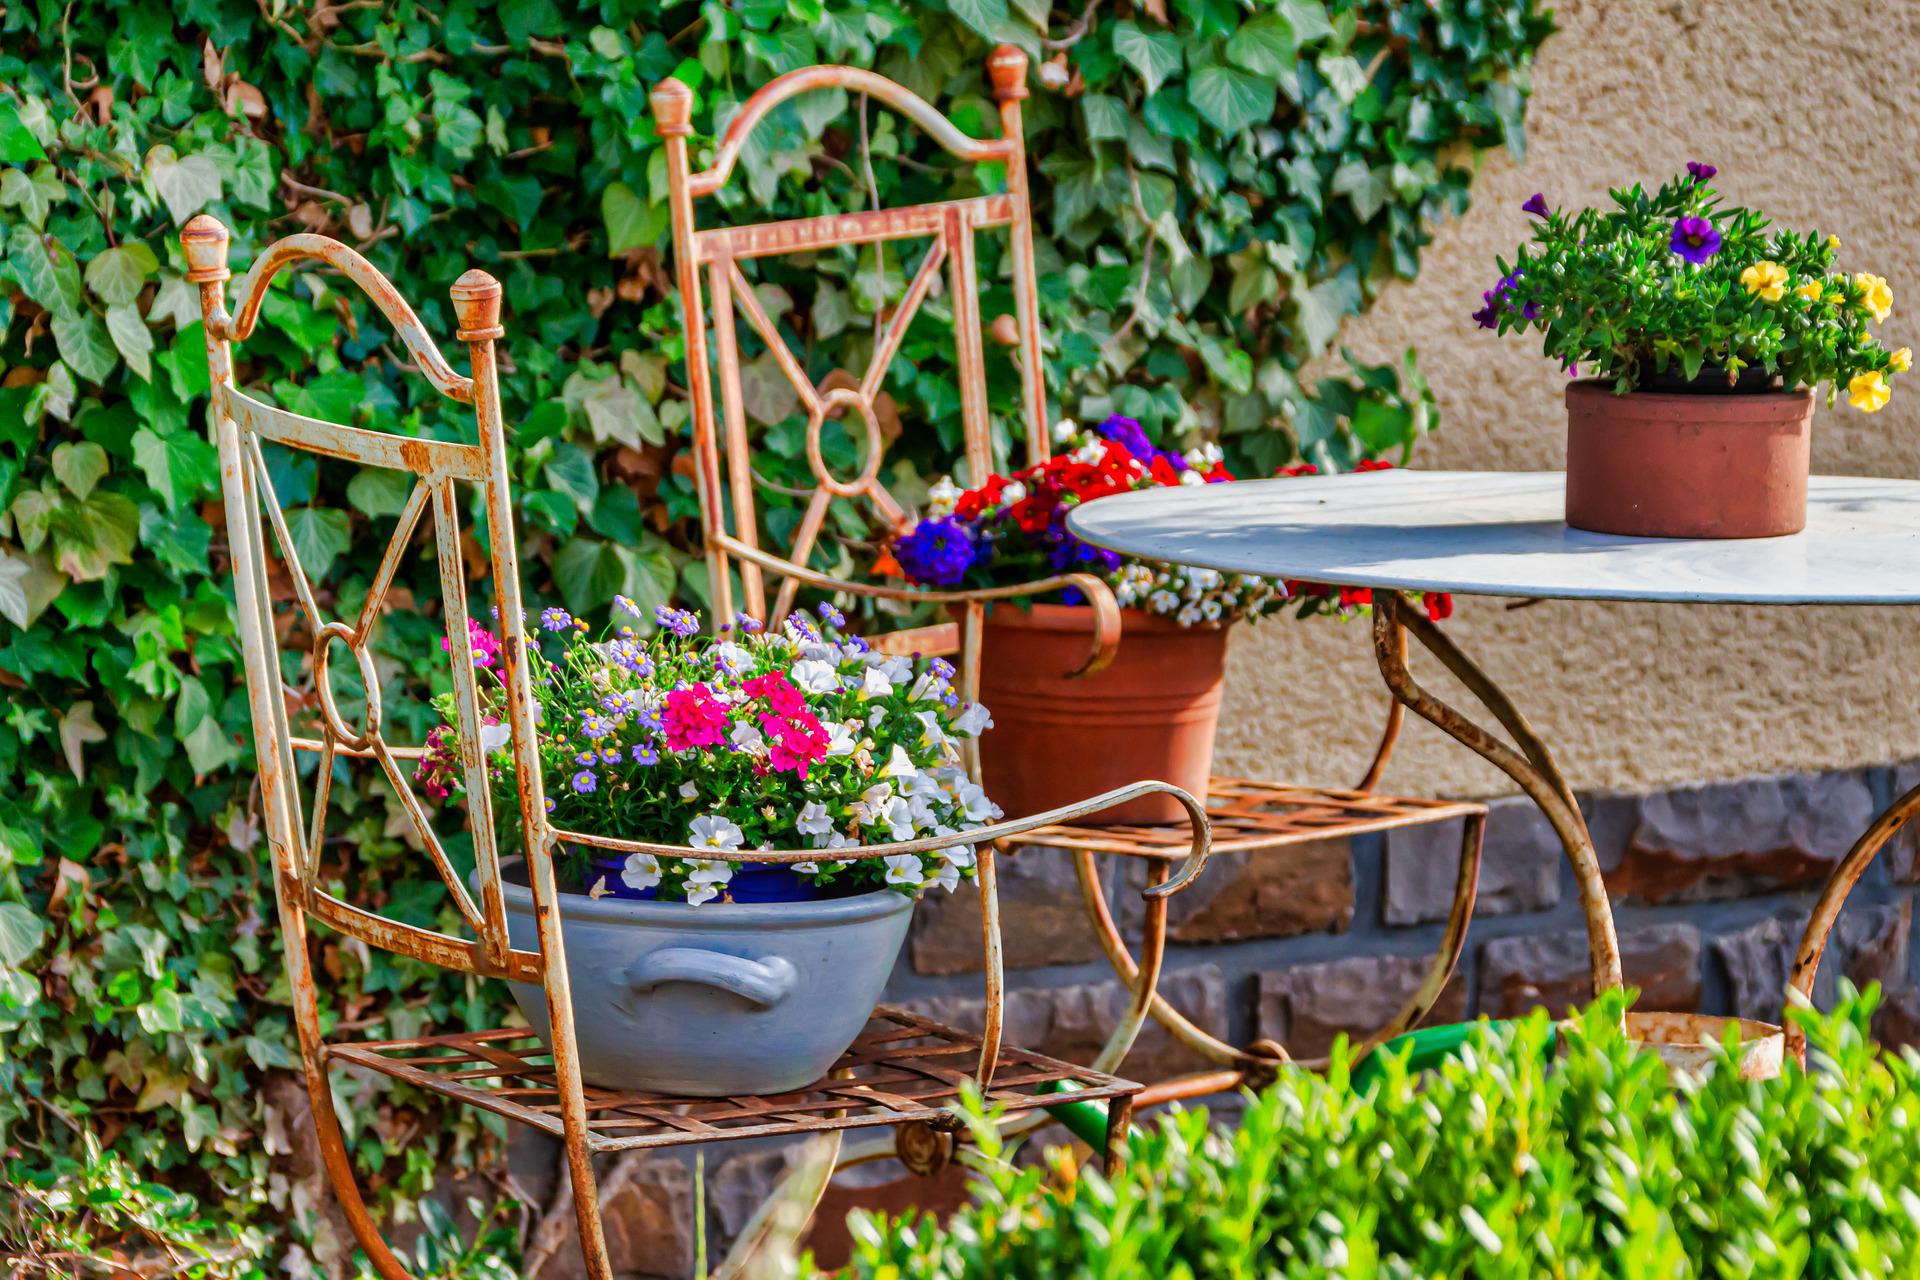 How to Decorate Your Garden for Summer: 5 Easy Ideas For Every Style